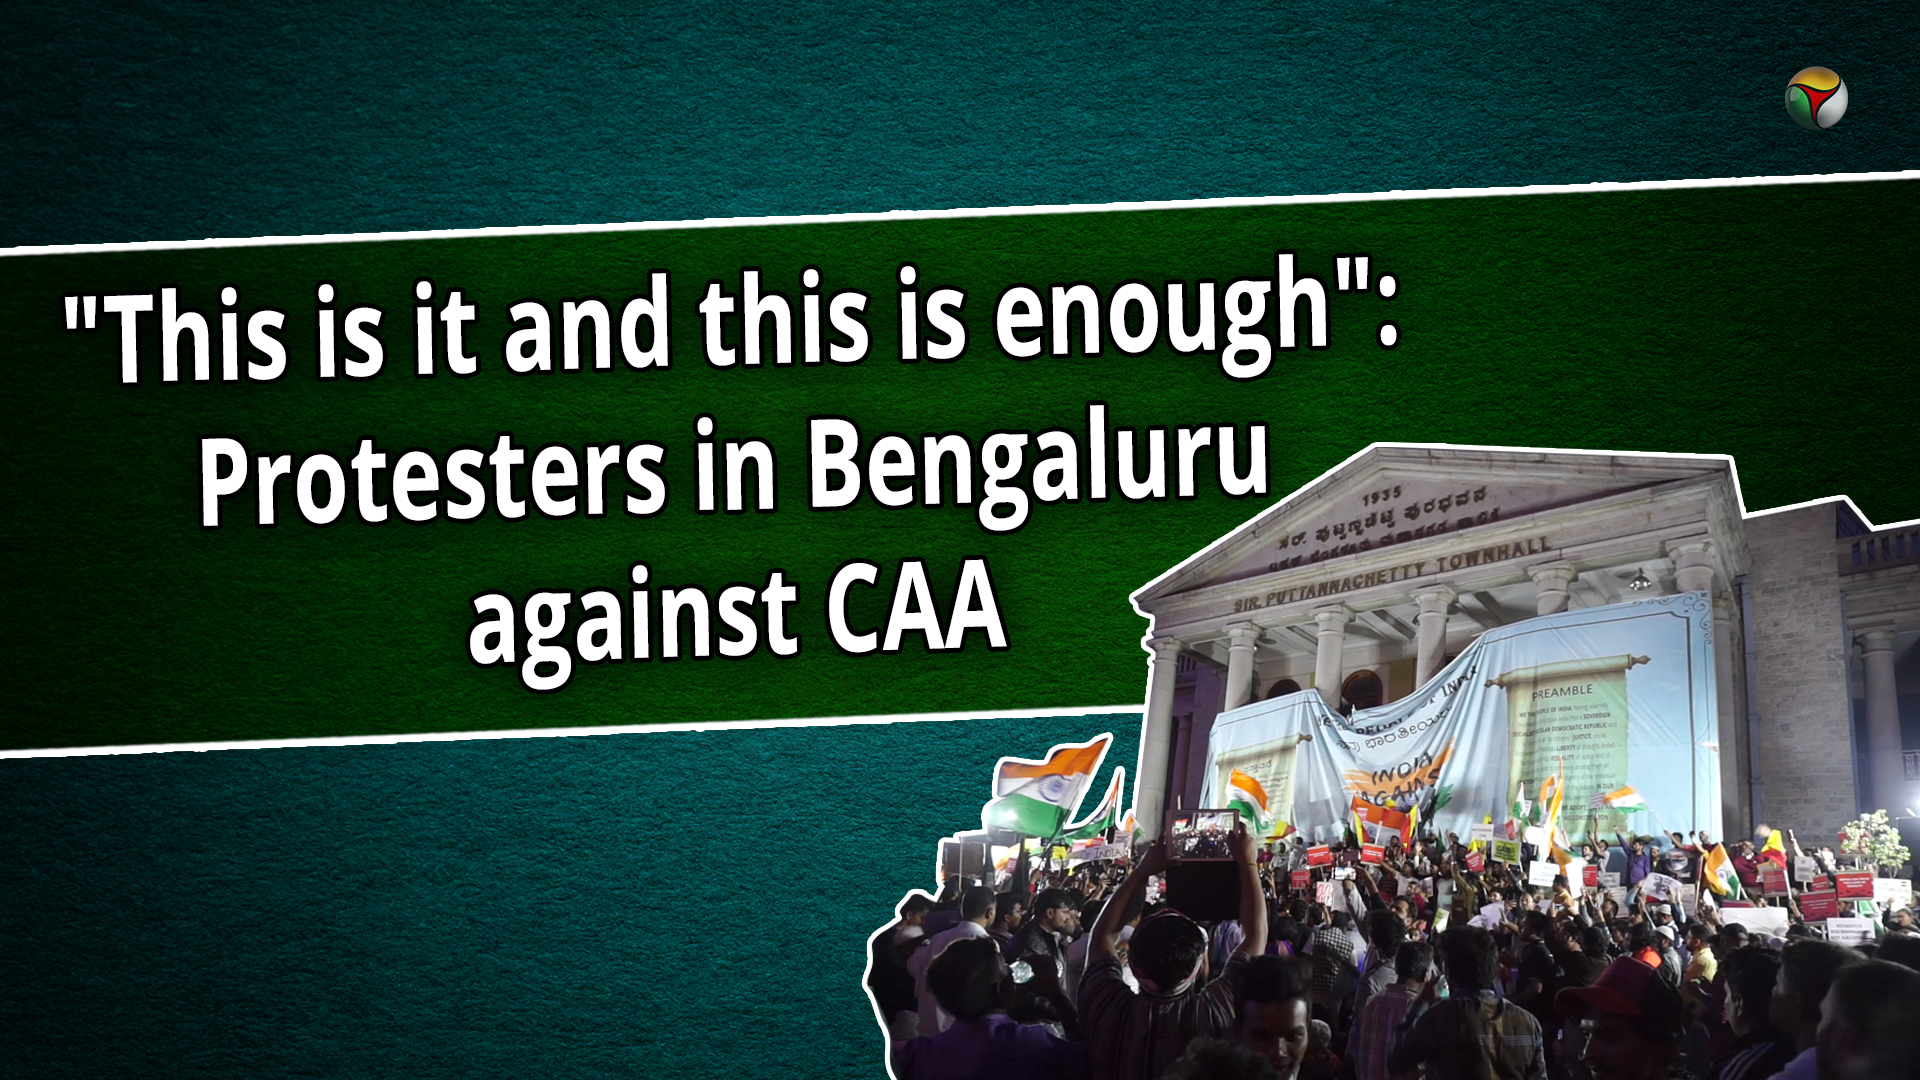 This is it and this is enough: Protesters in Bengaluru against CAA